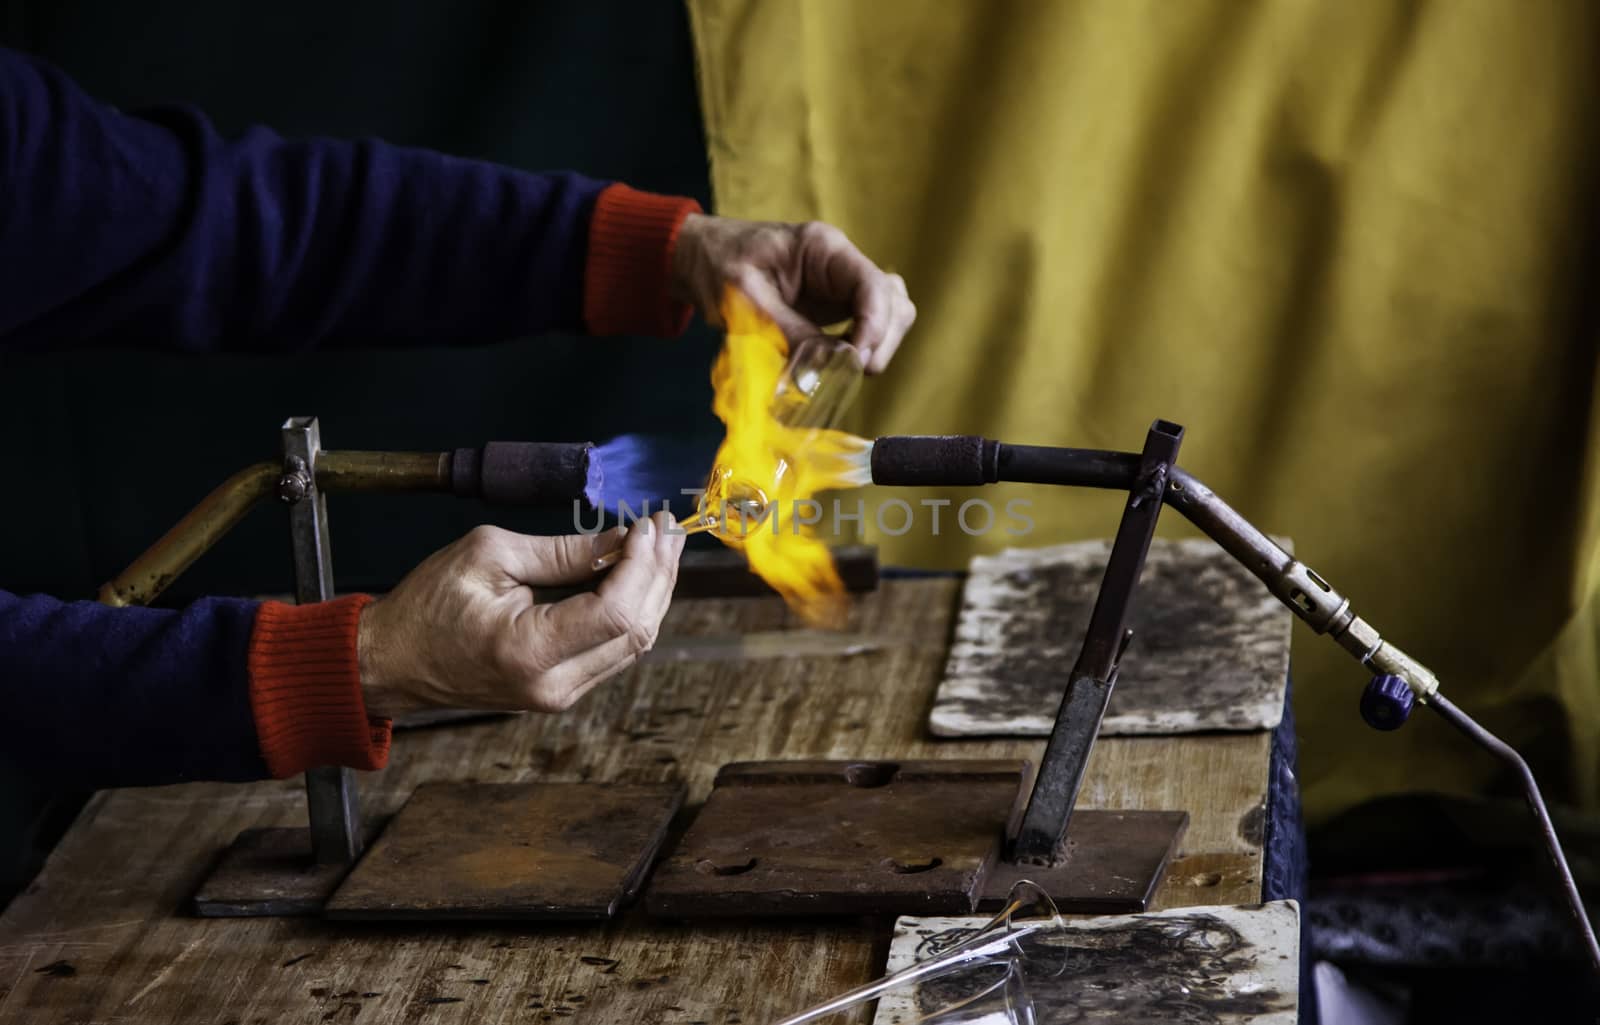 Blowing glass with fire by esebene